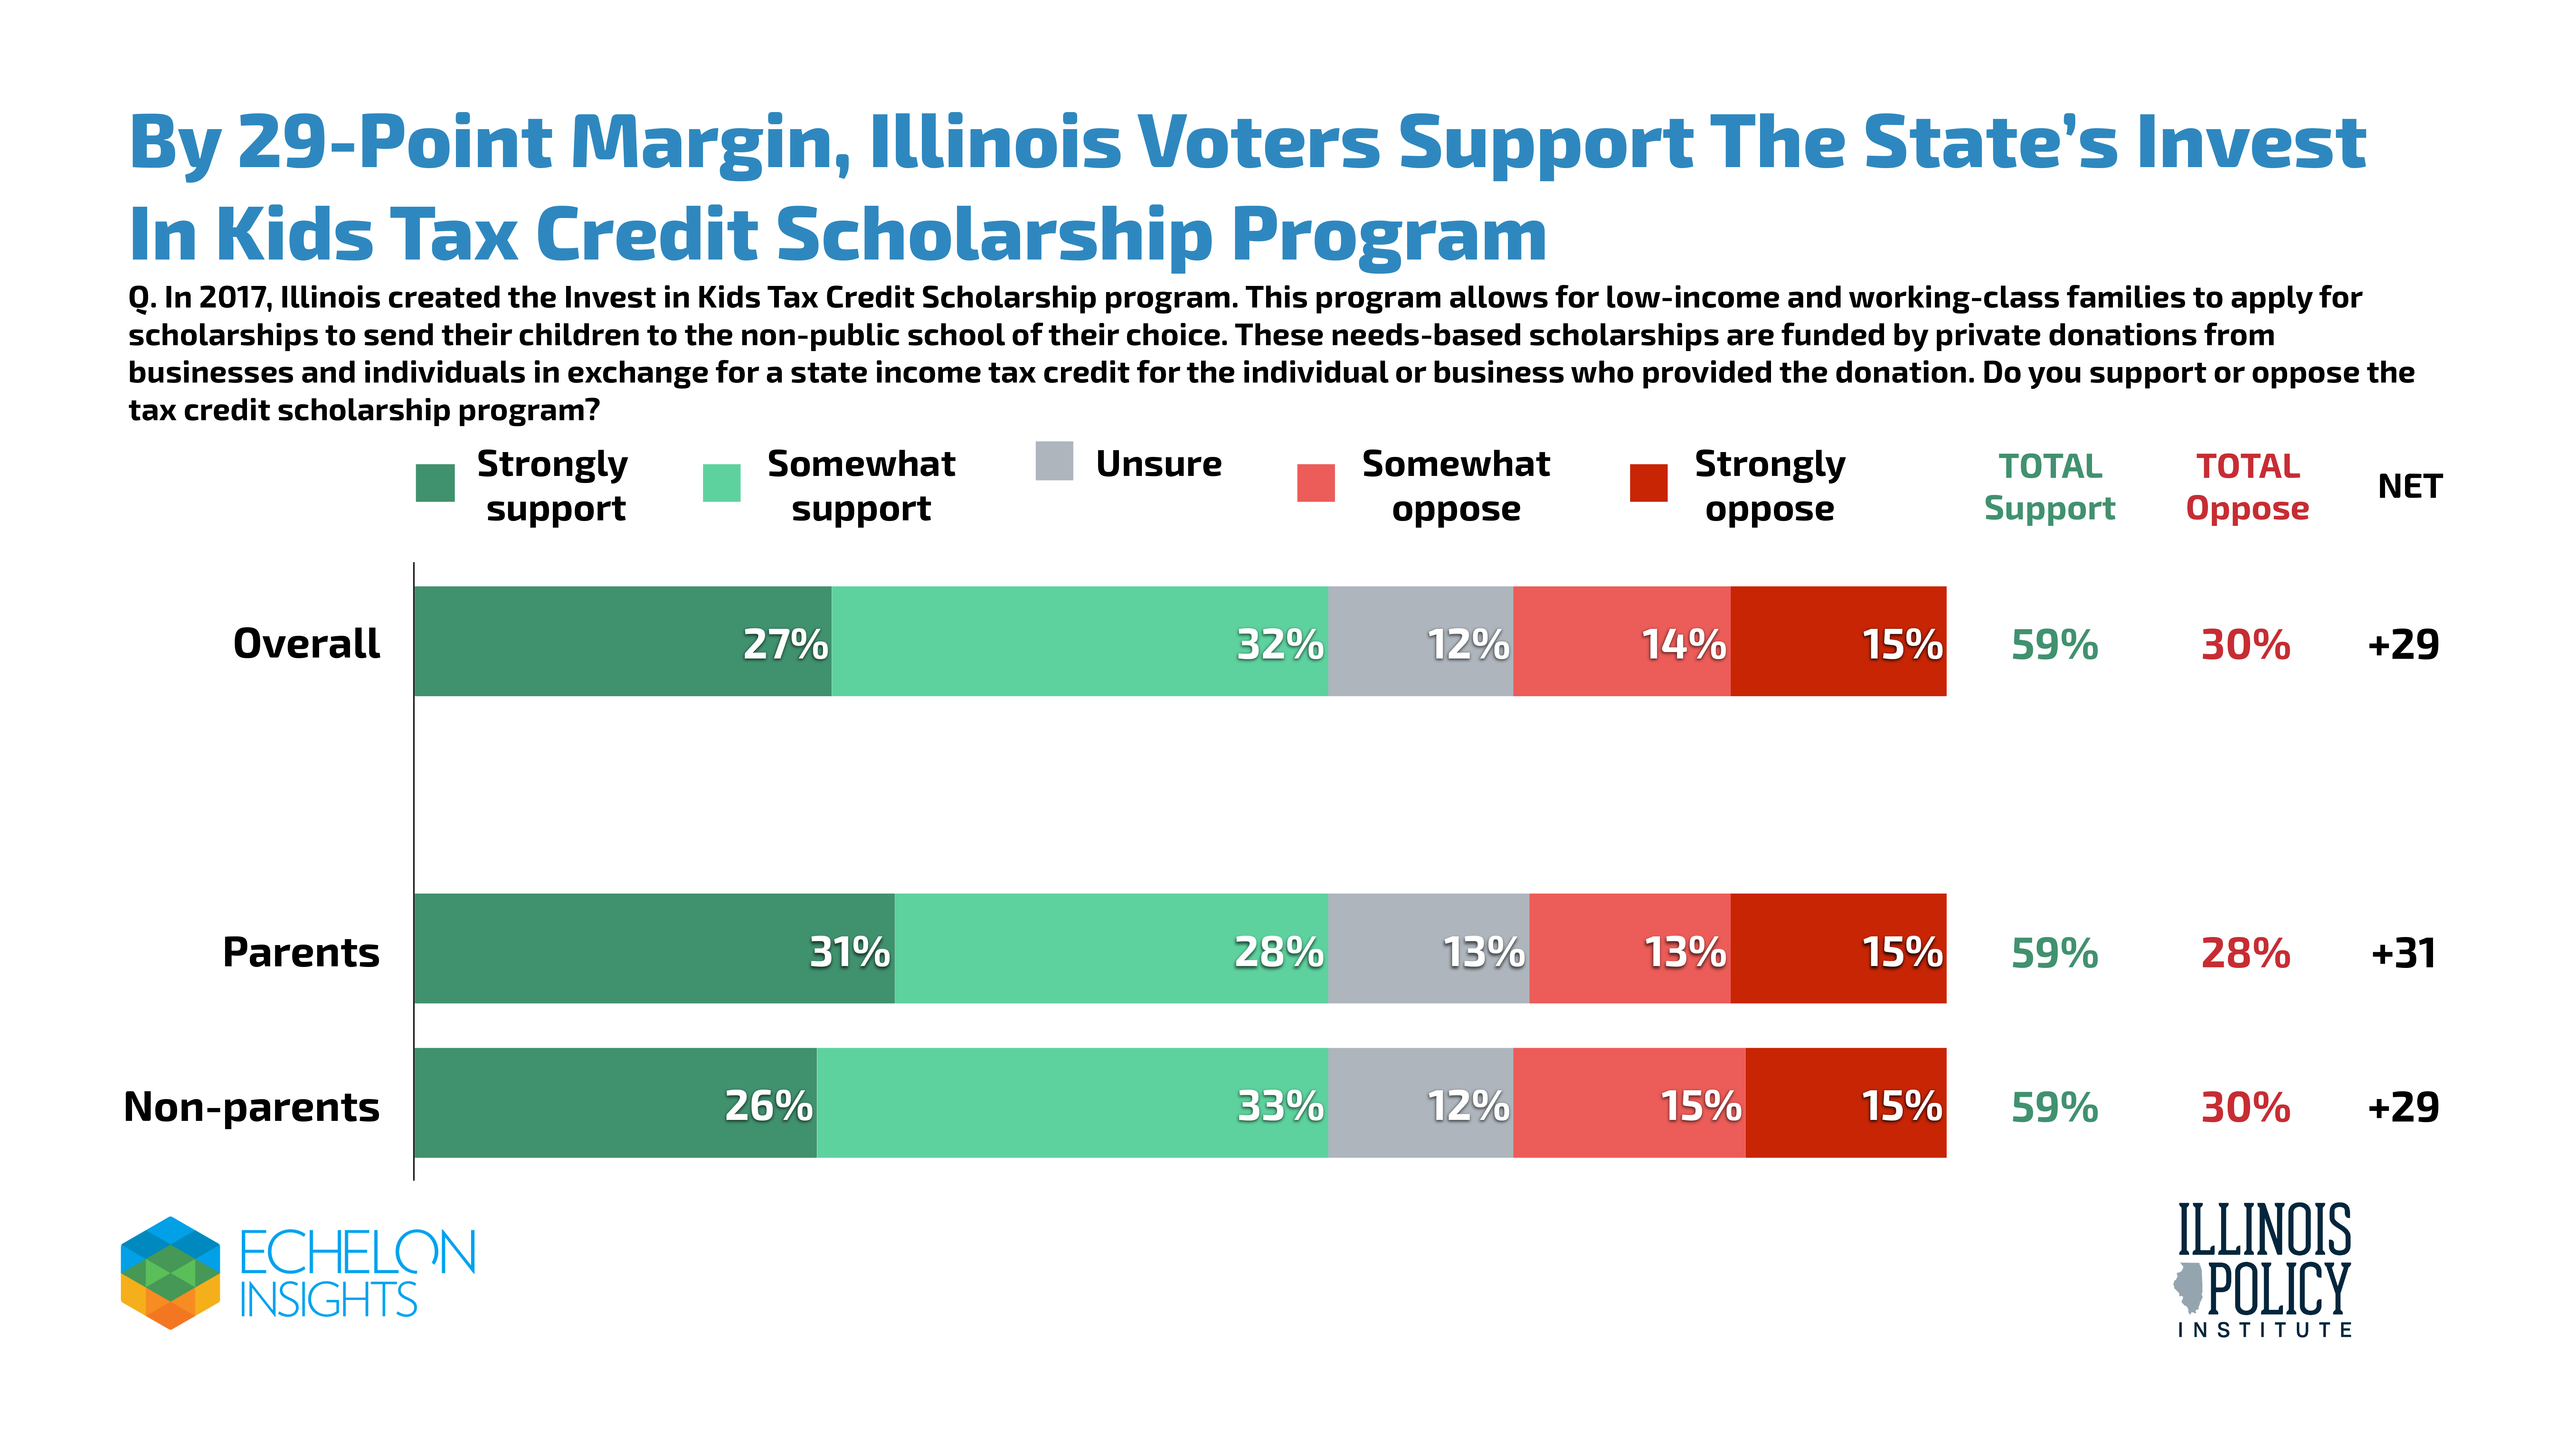 By 29-Point Margin, Illinois Voters Support The State's Invest In Kids Tax Credit Scholarship Program